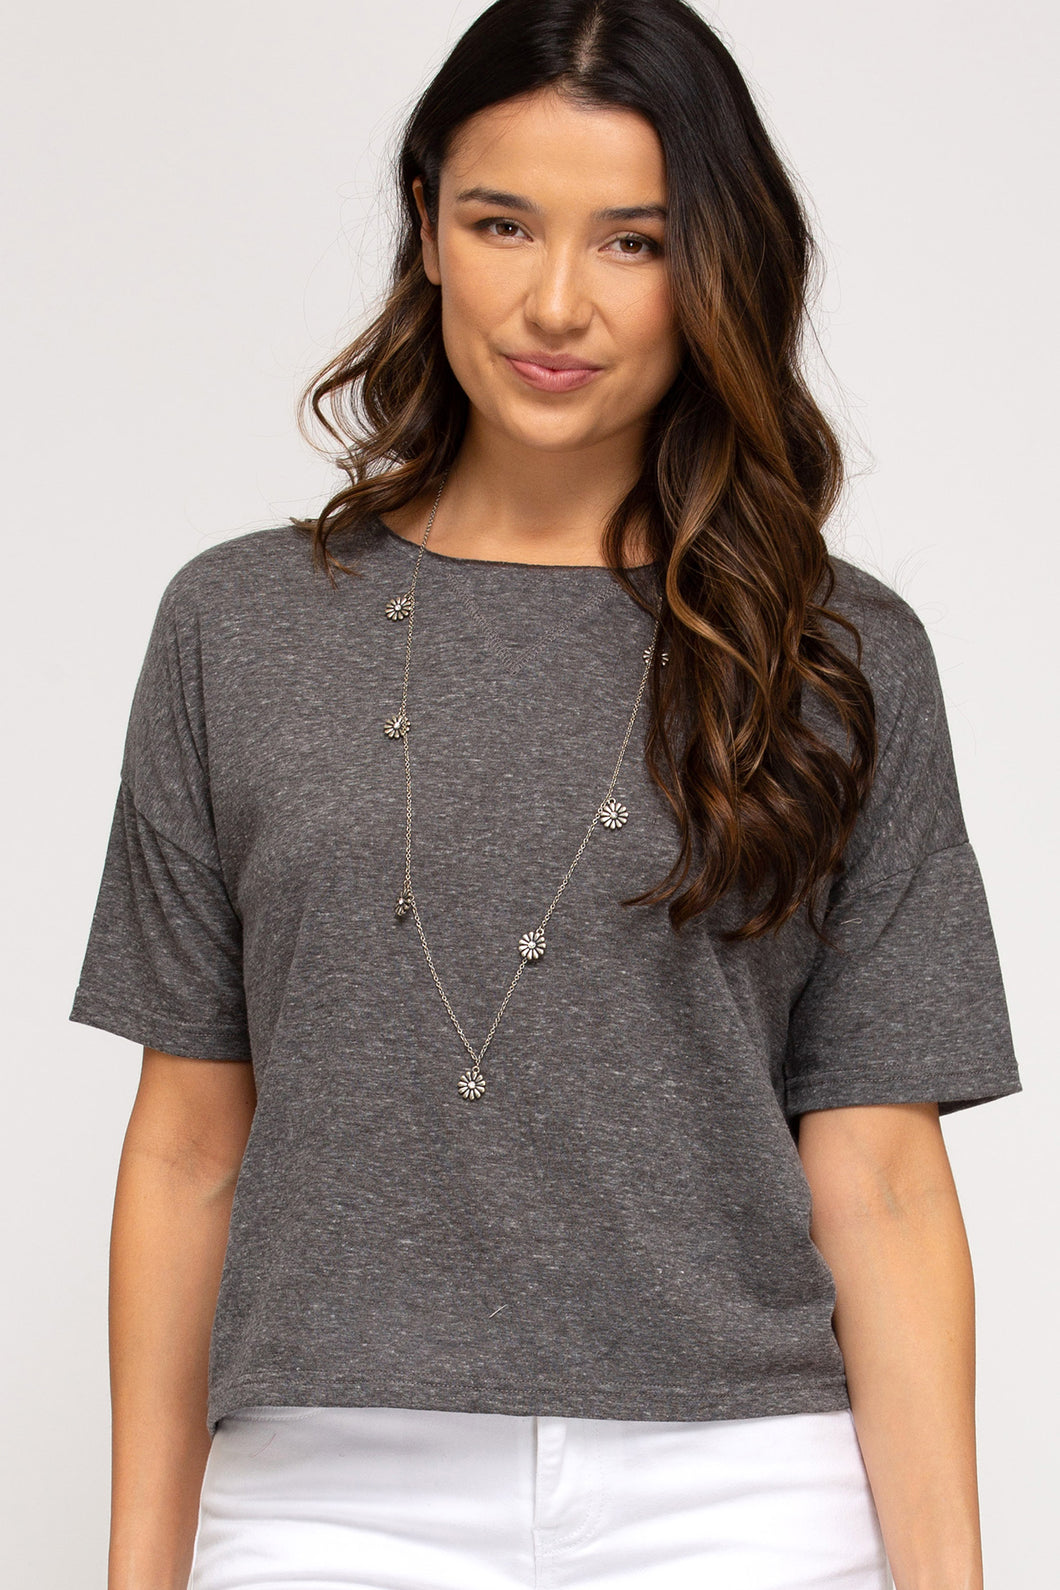 Short sleeve top in Charcoal